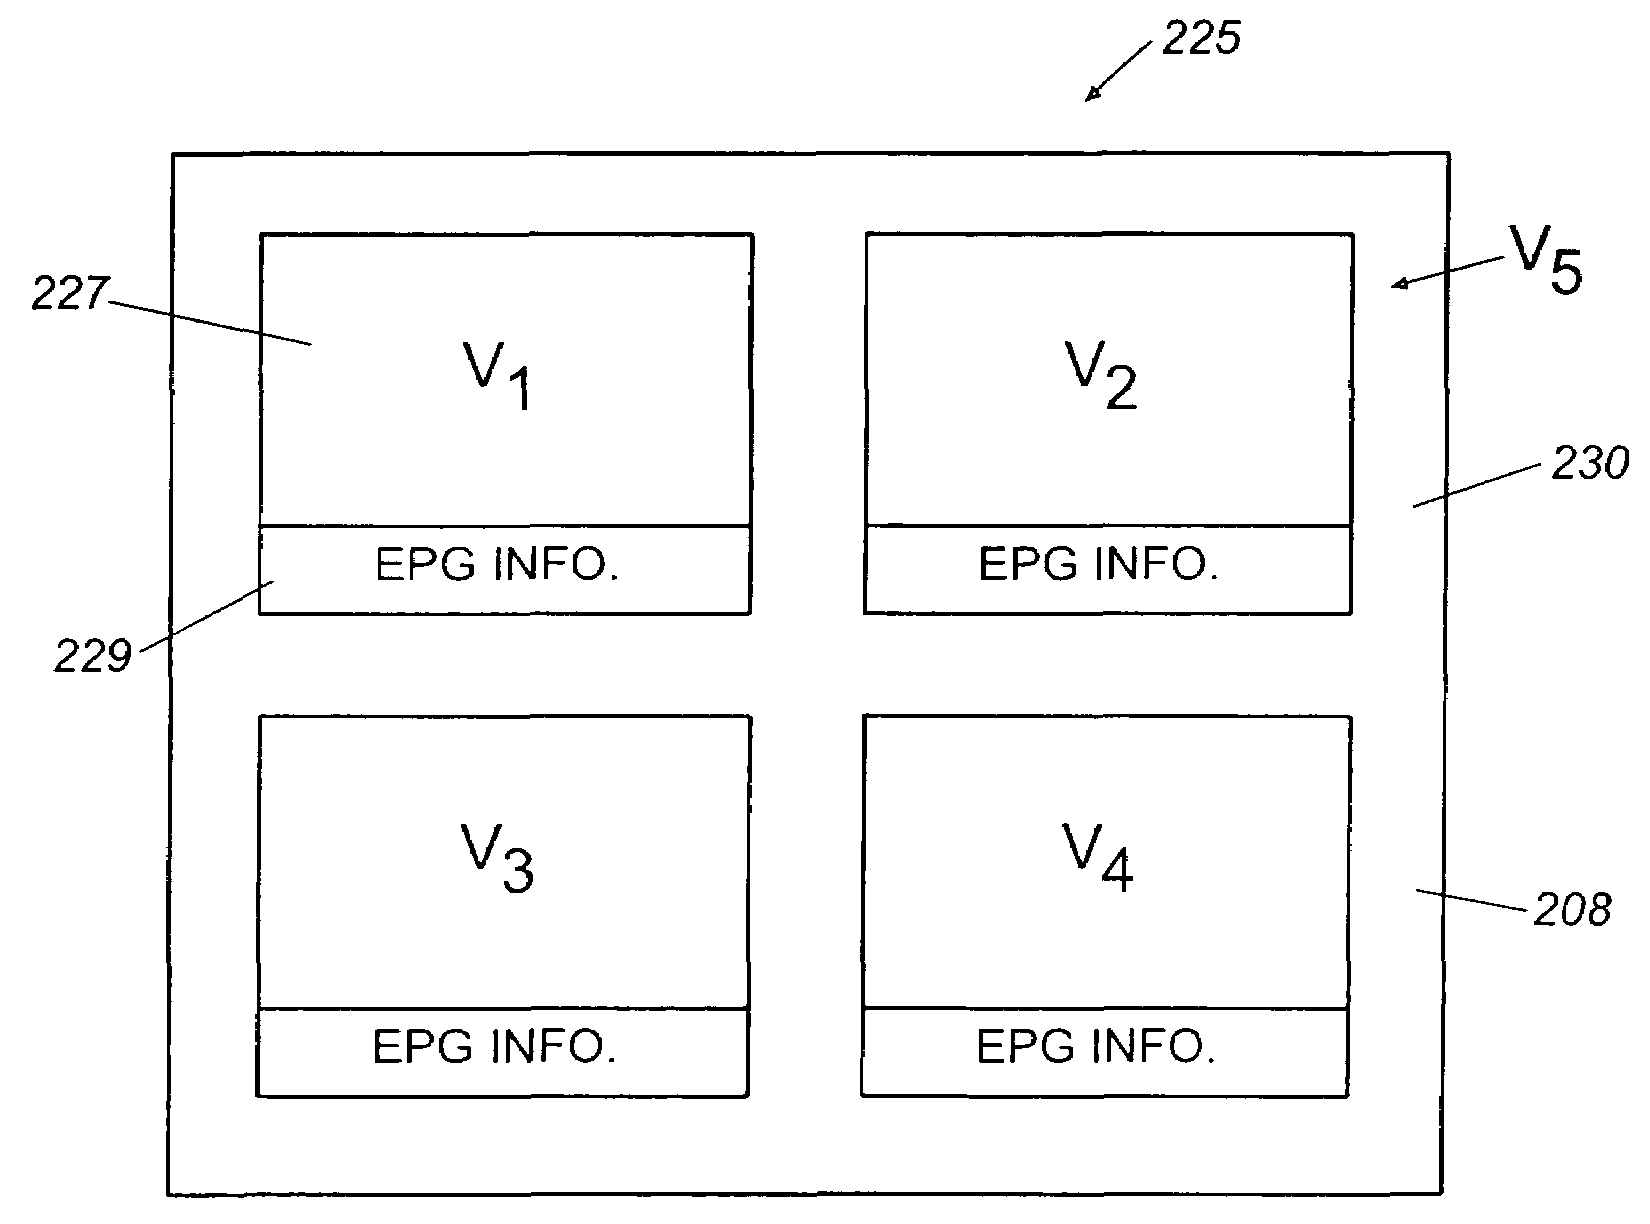 Apparatuses and methods to enable the simultaneous viewing of multiple television channels and electronic program guide content